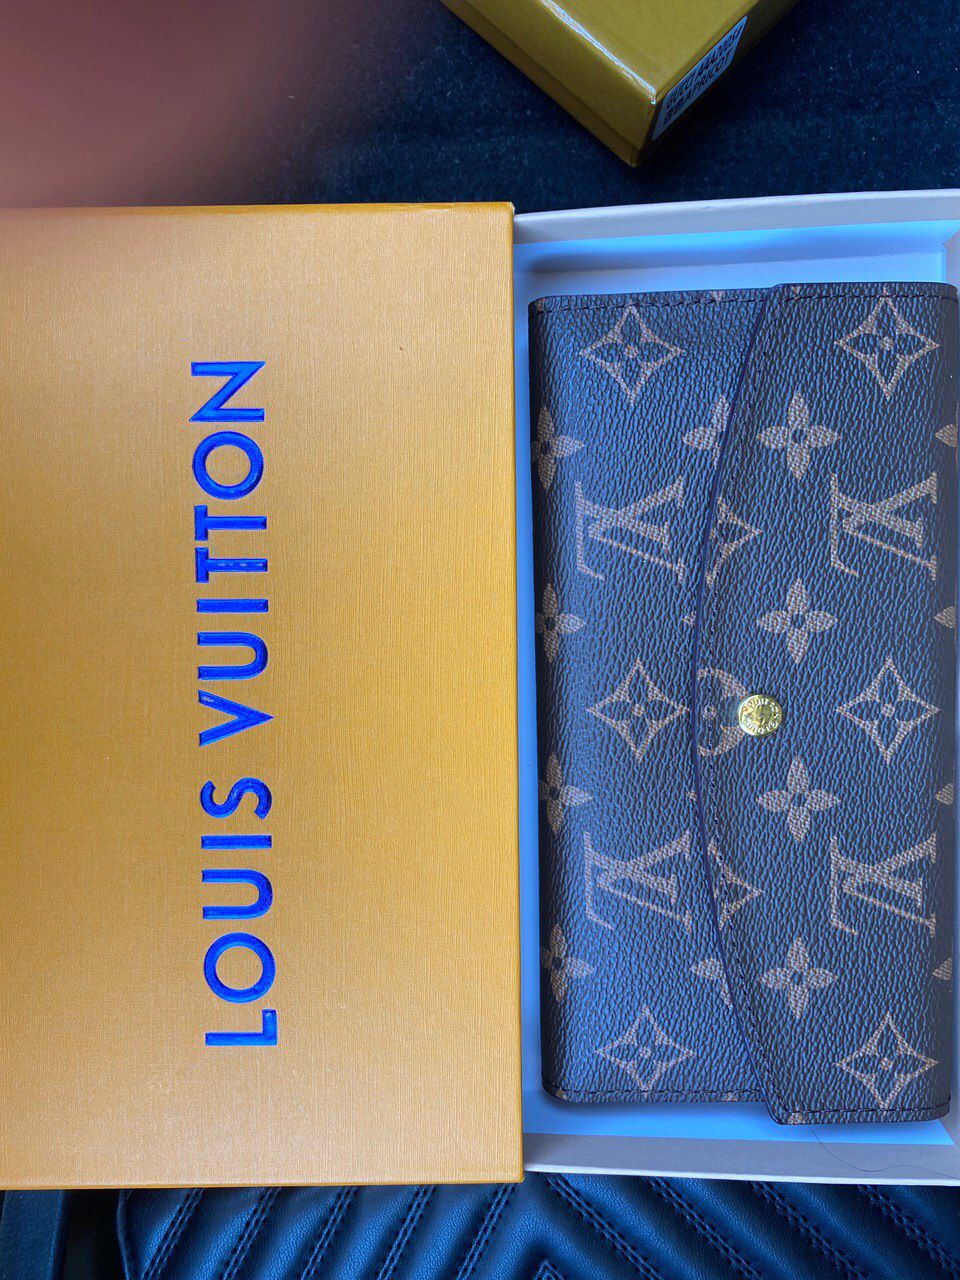 Wallet new inside the box